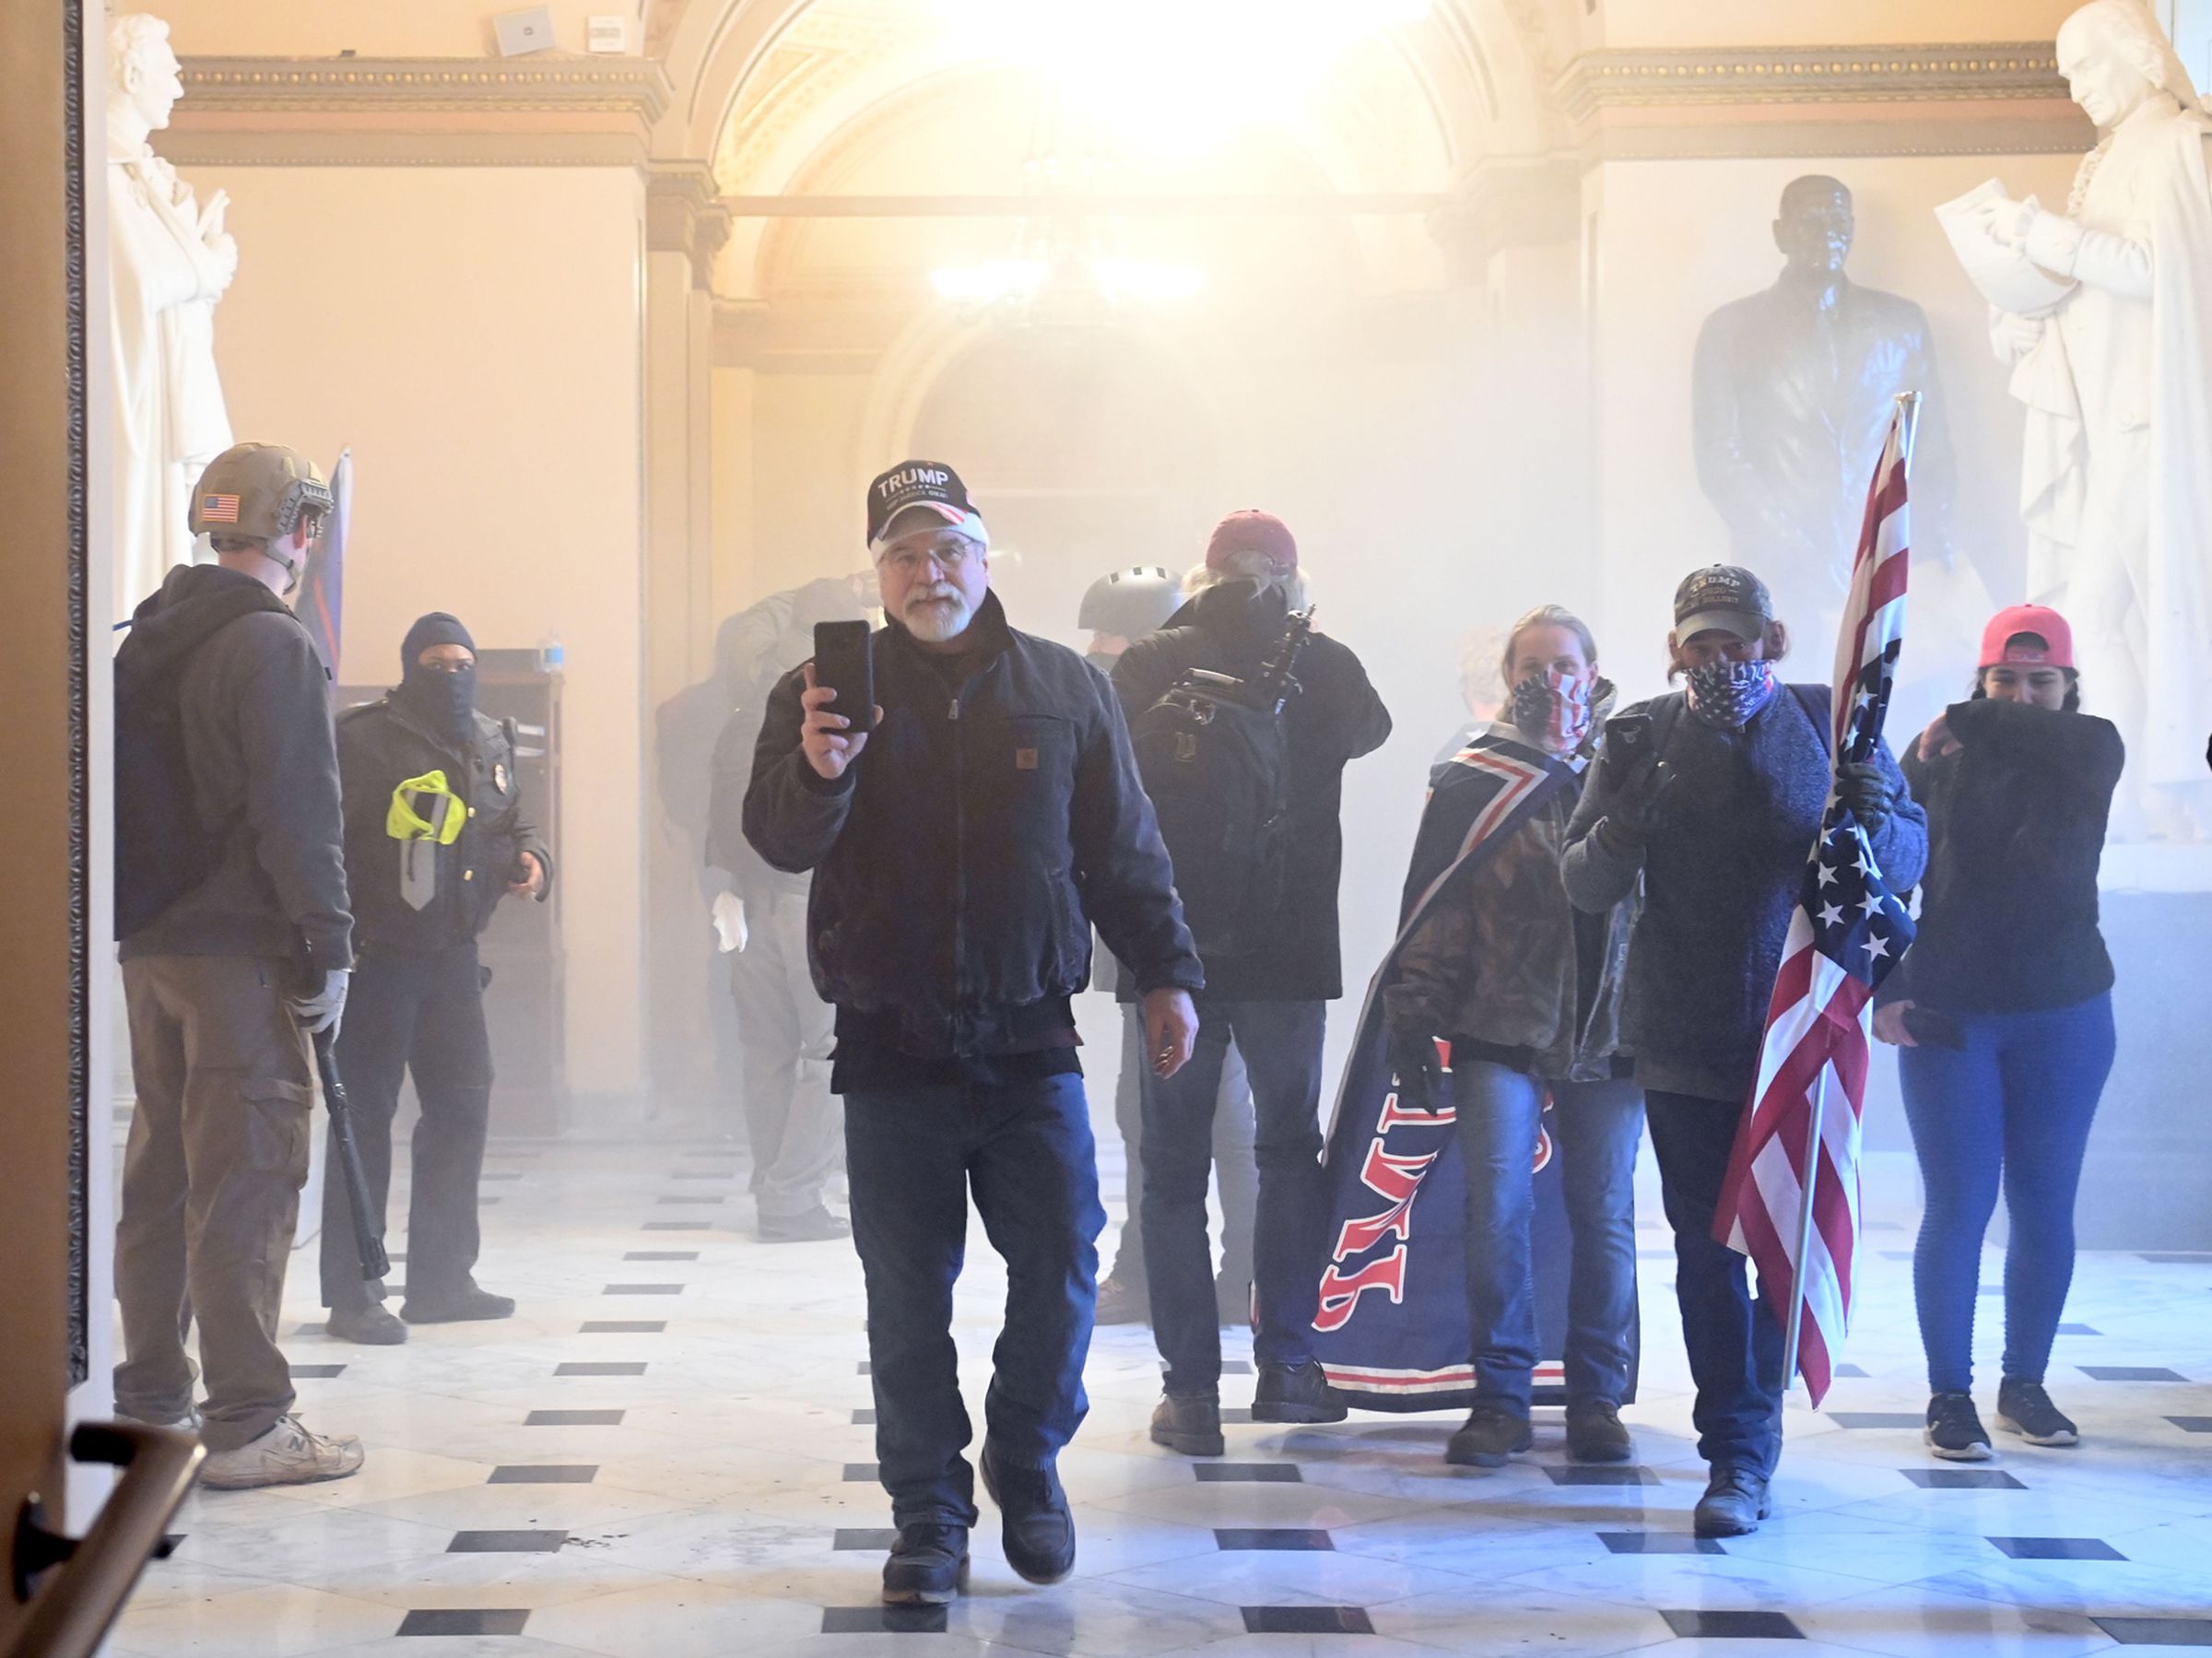 Protesters enter the US Capitol as tear gas fills the corridor.